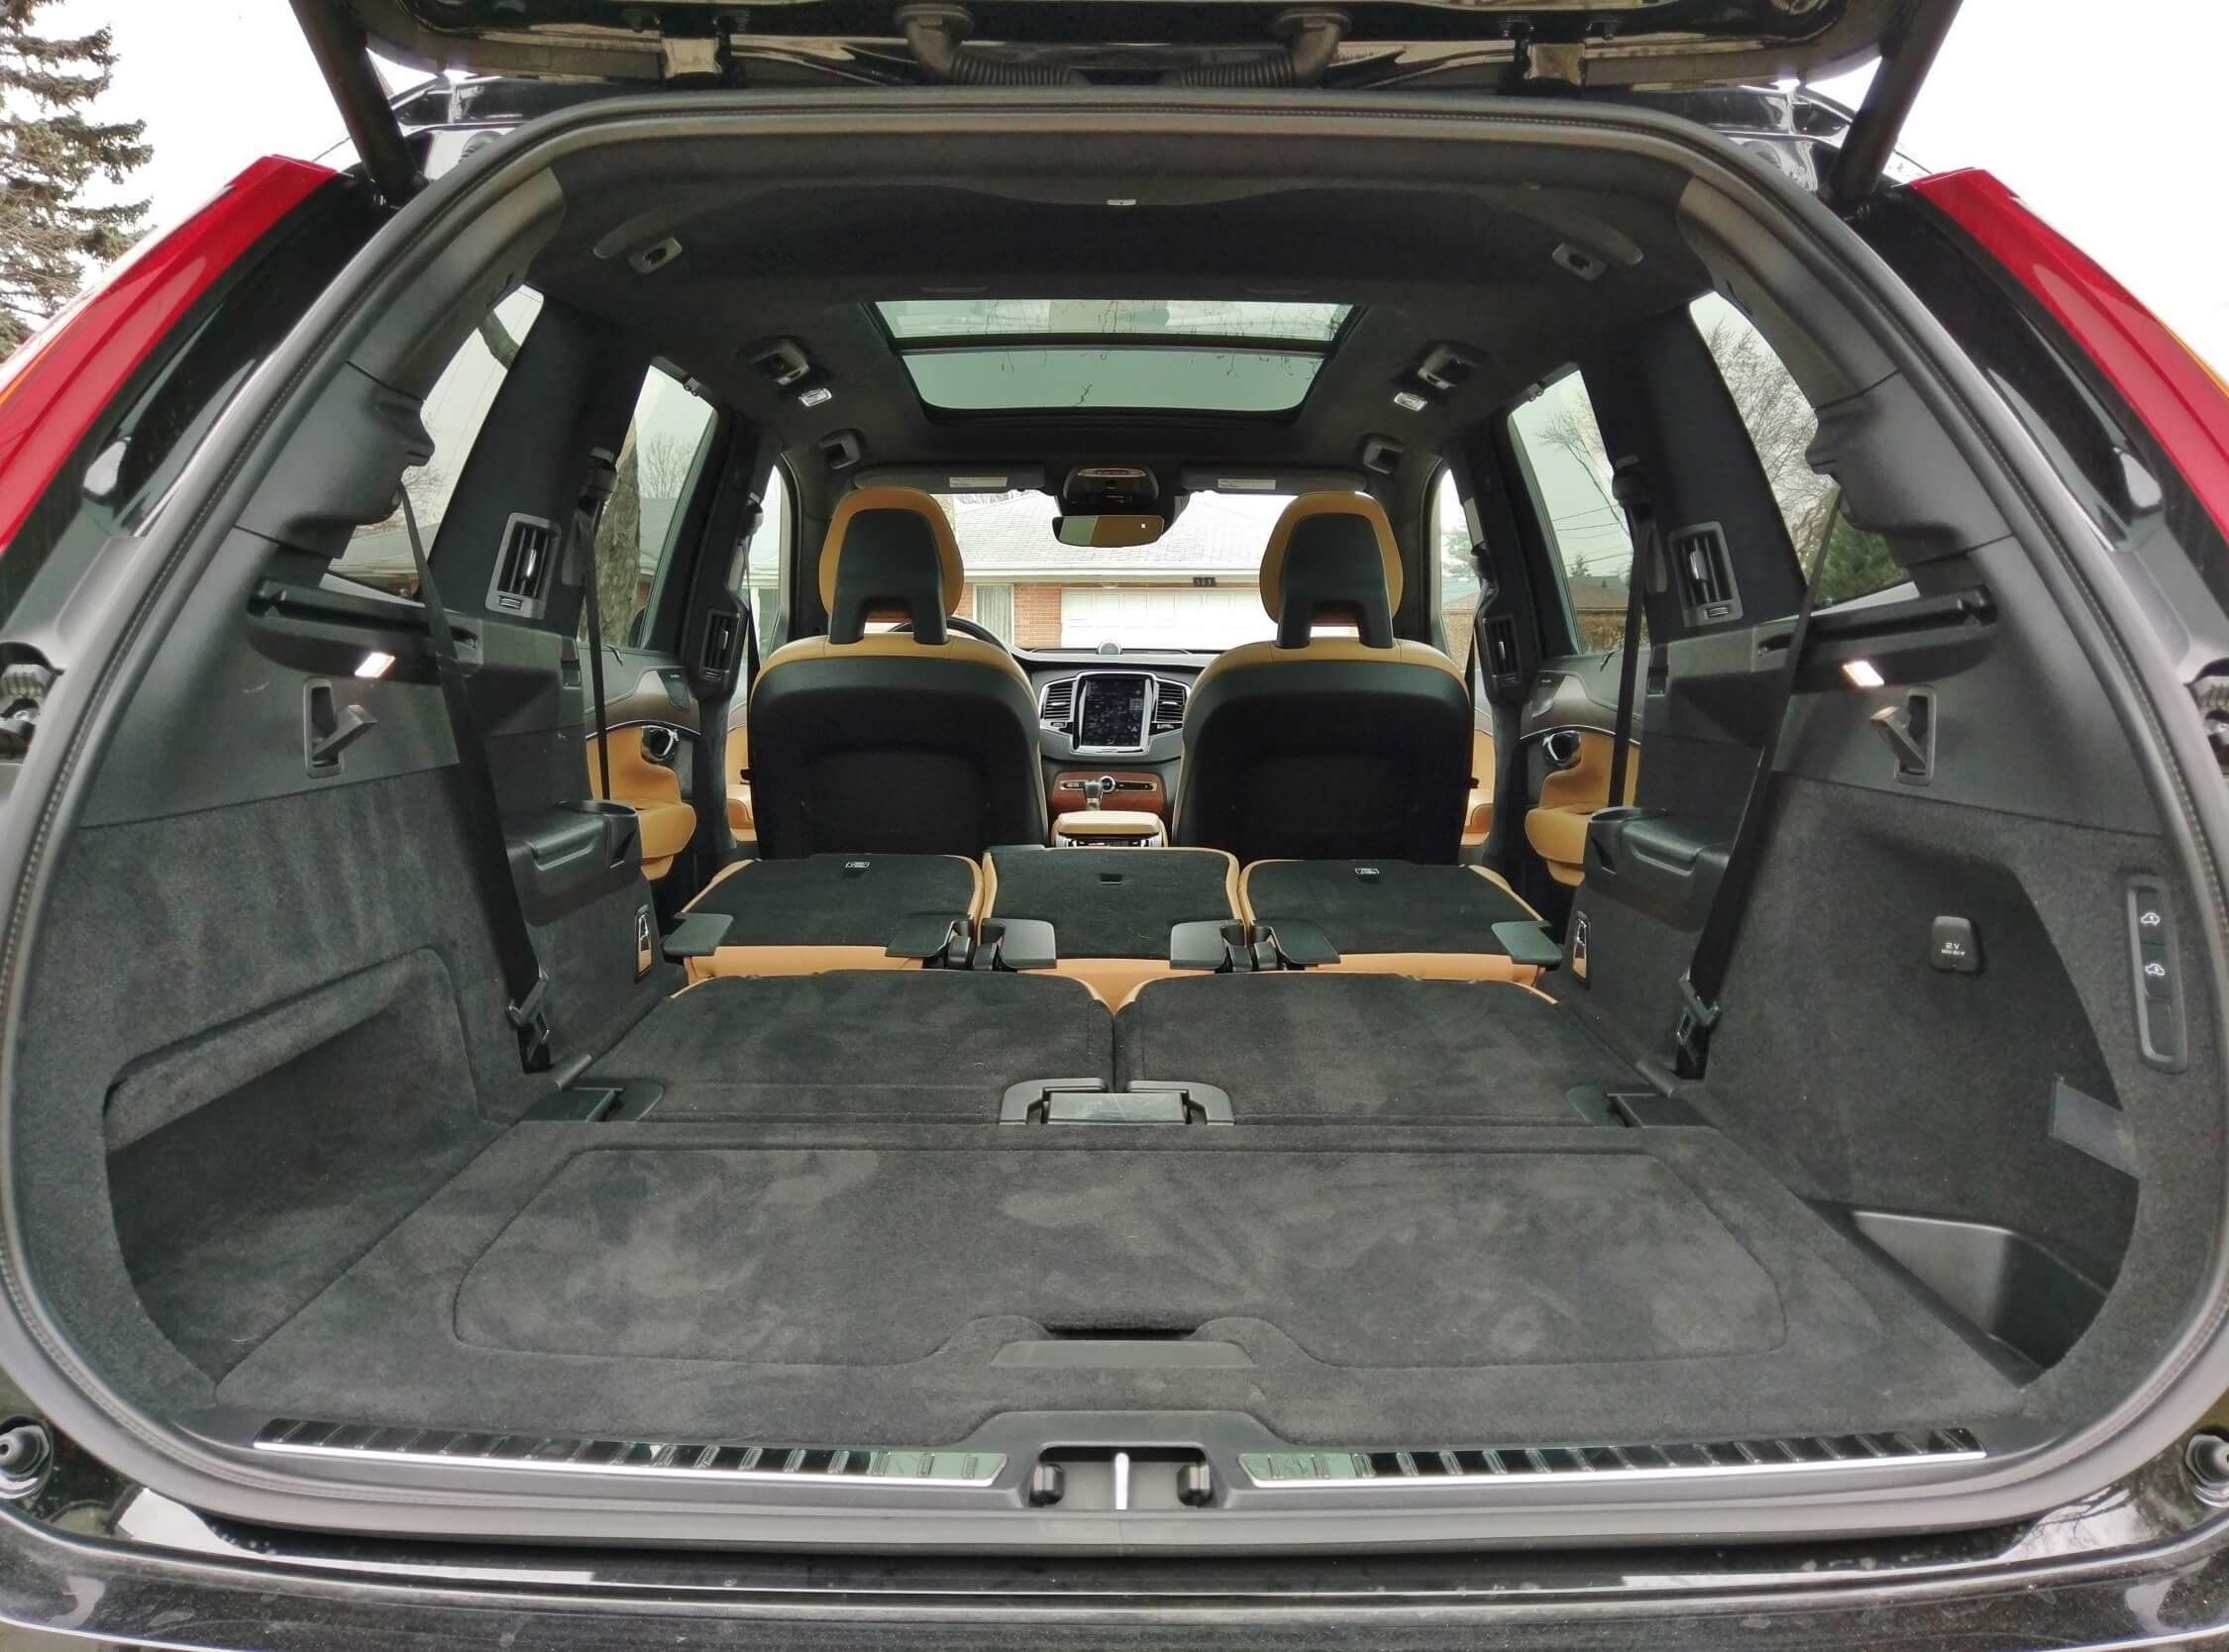 2017 XC90 T6 AWD Inscription: Fully expanded cargo hold